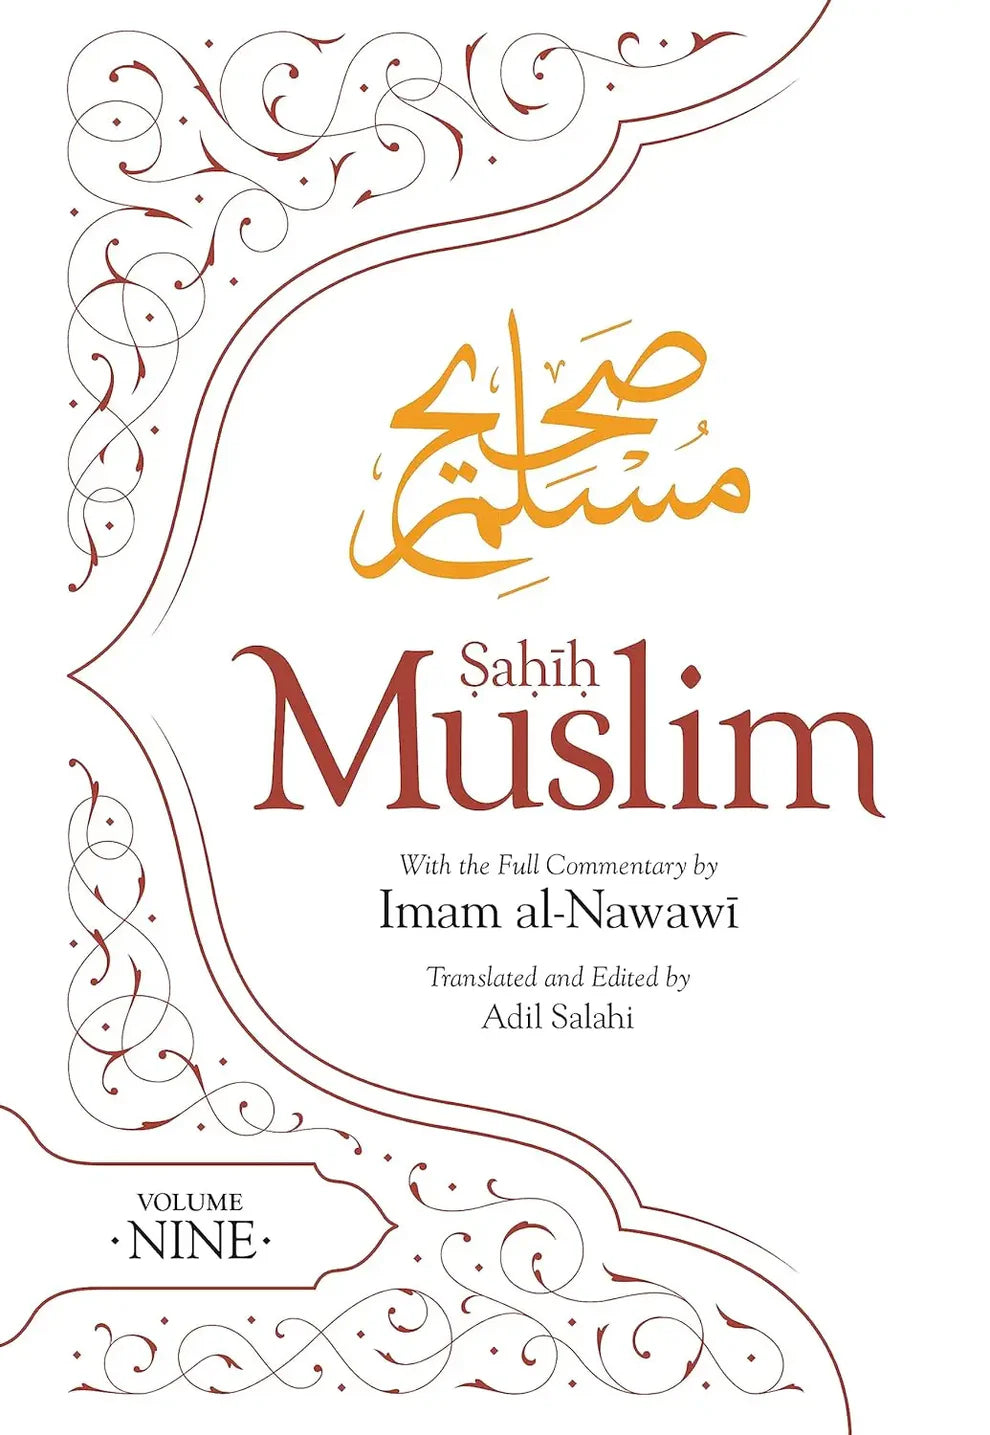 Sahih Muslim Vol. 9 With the Full Commentary by Imam Nawawi (PB)